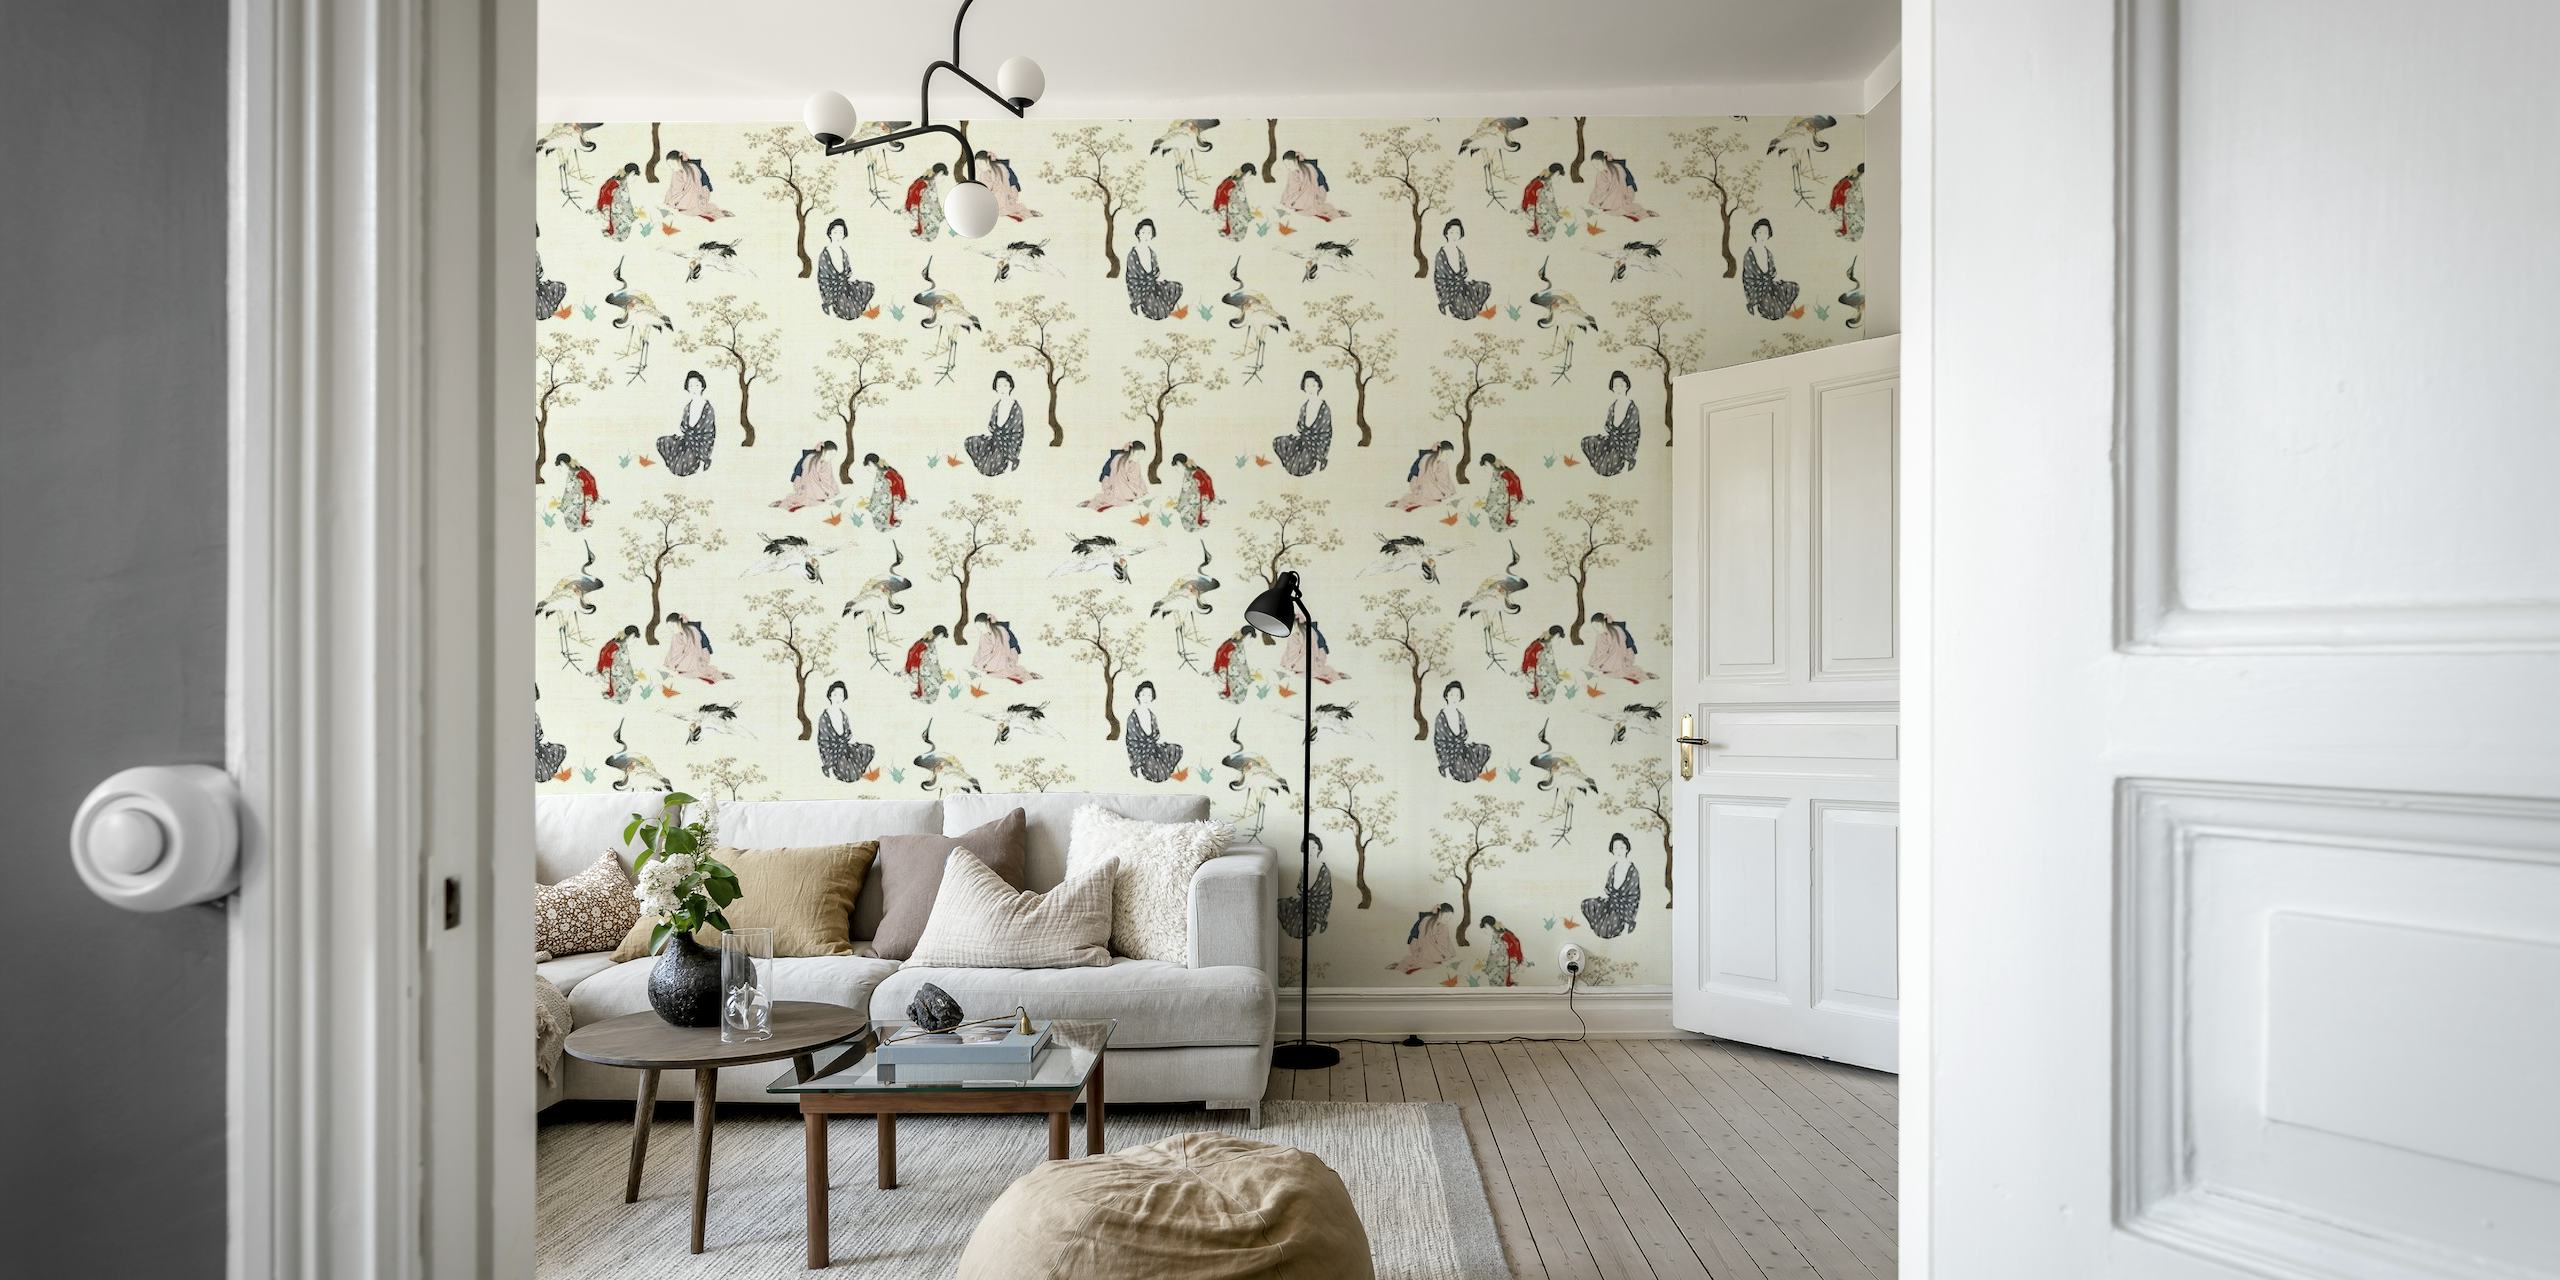 Asian Chinoiserie wall mural depicting women in traditional clothes with birds and blossoms